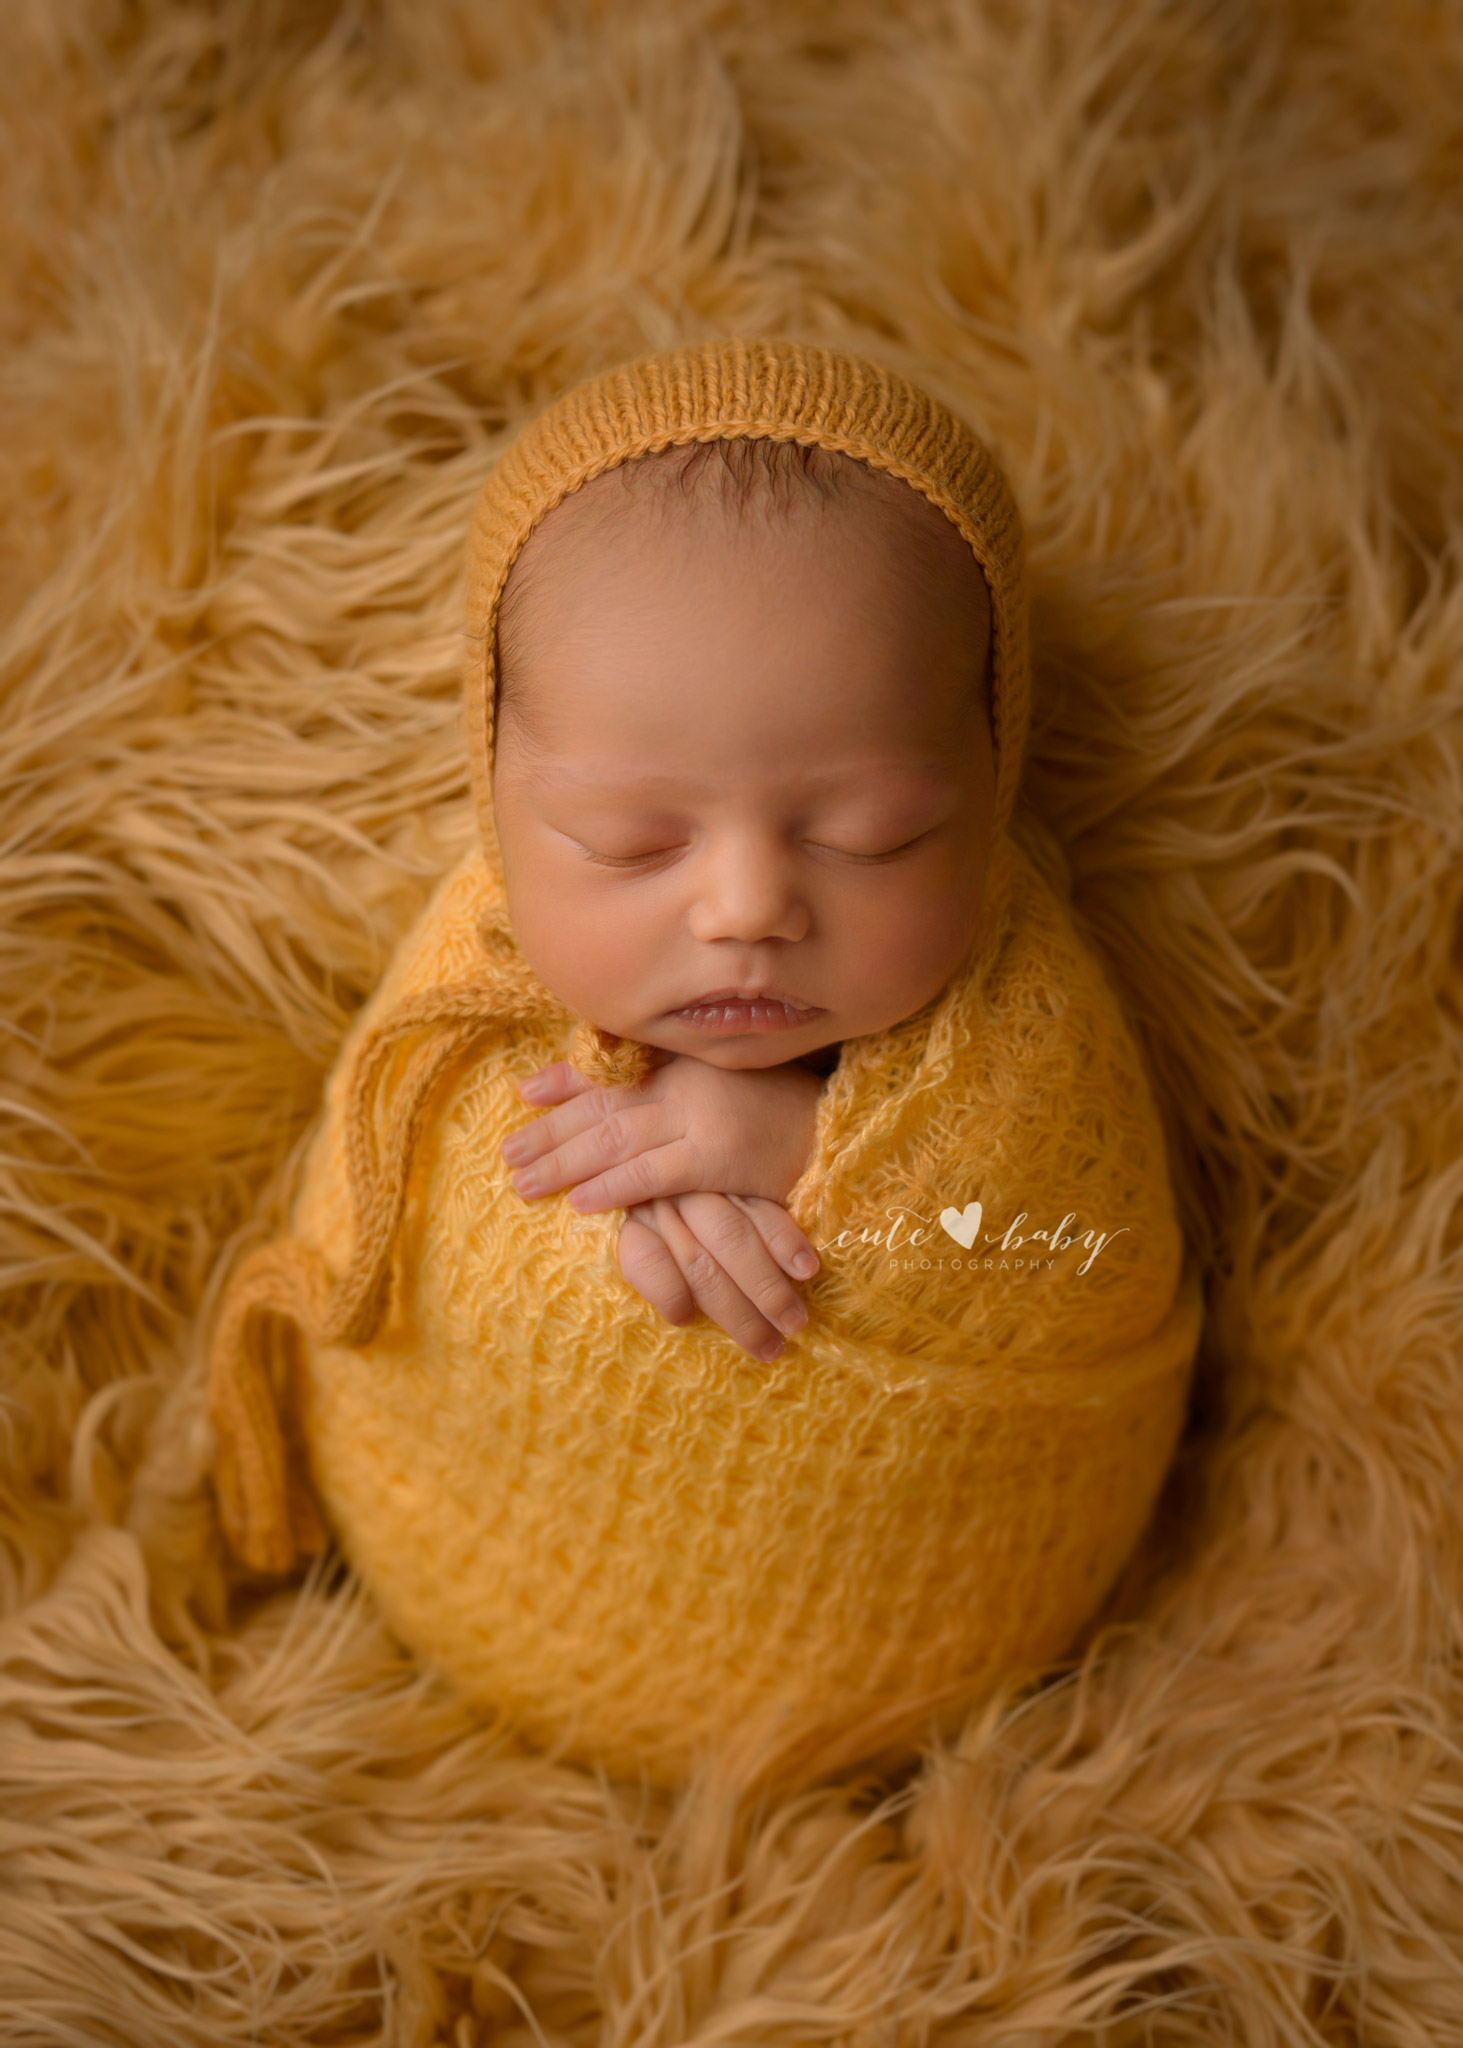 Newborn Photography Manchester by Cute Baby Photography, Newborn photography studio Greater Manchester, Baby Photography, Newborn Session Manchester, Newborn Photography Manchester